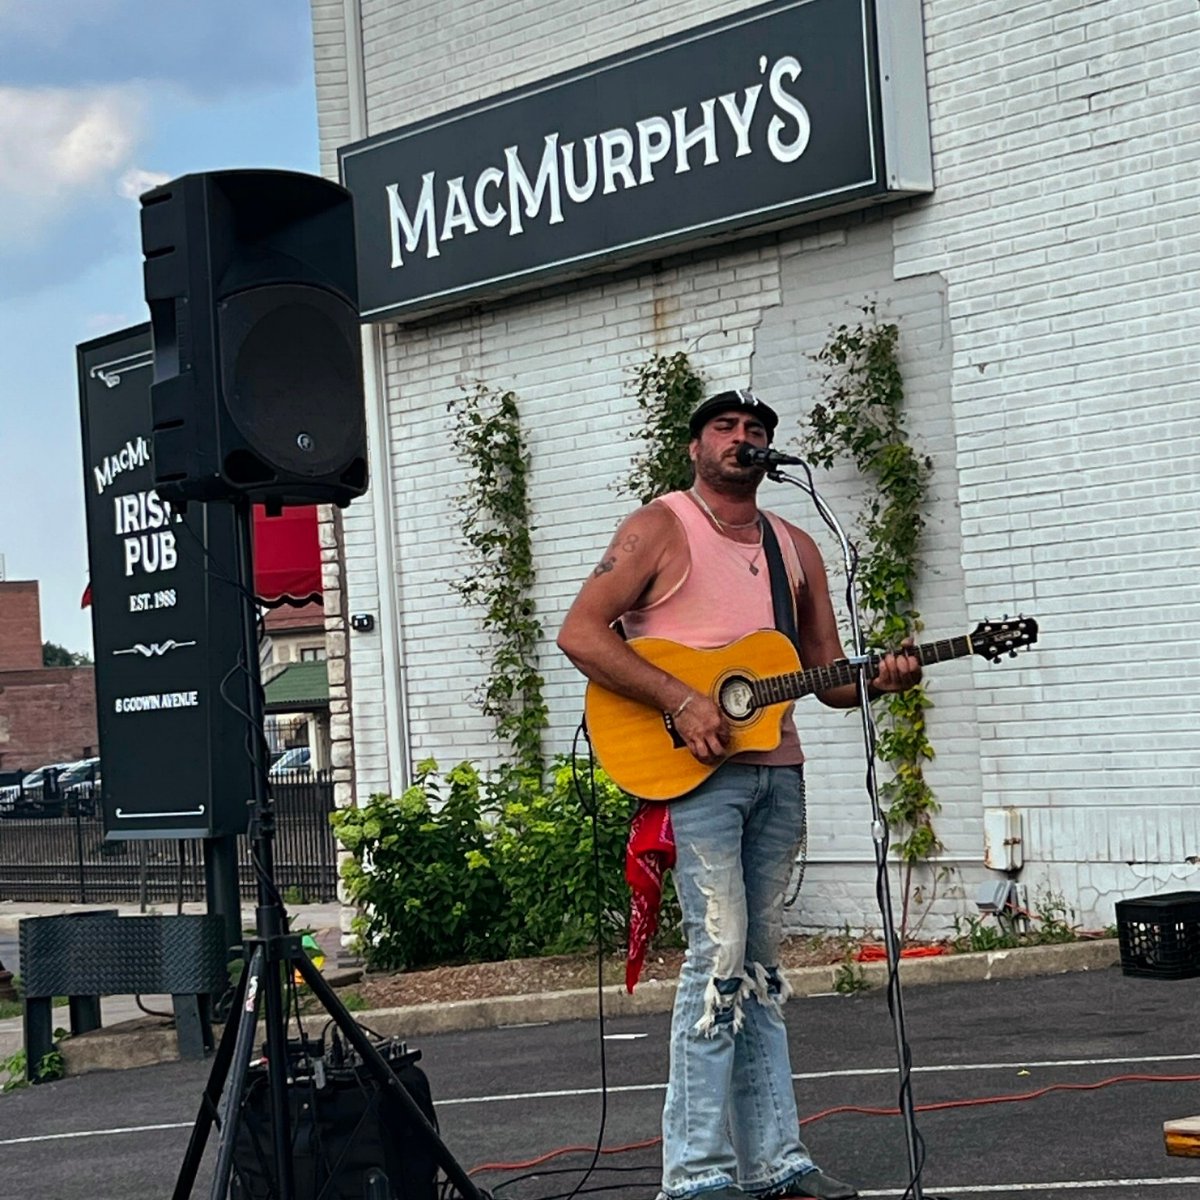 It's that time of year again ☀️!!
 ♪♫•*¨*•.¸¸ 🌊🌞🏖 ¸¸.•*¨*•♫♪
Hoping for 90° on Monday!!
Join me for some great food, drinks, and LIVE #Acoustic music at @MacMurphysNJ 4/29 530pm!!
𝑺𝒆𝒆 𝒚𝒐𝒖 𝒕𝒉𝒆𝒓𝒆!! ♪♫•*¨*•.¸¸♥☪︎♥¸¸.•*¨*•♫♪